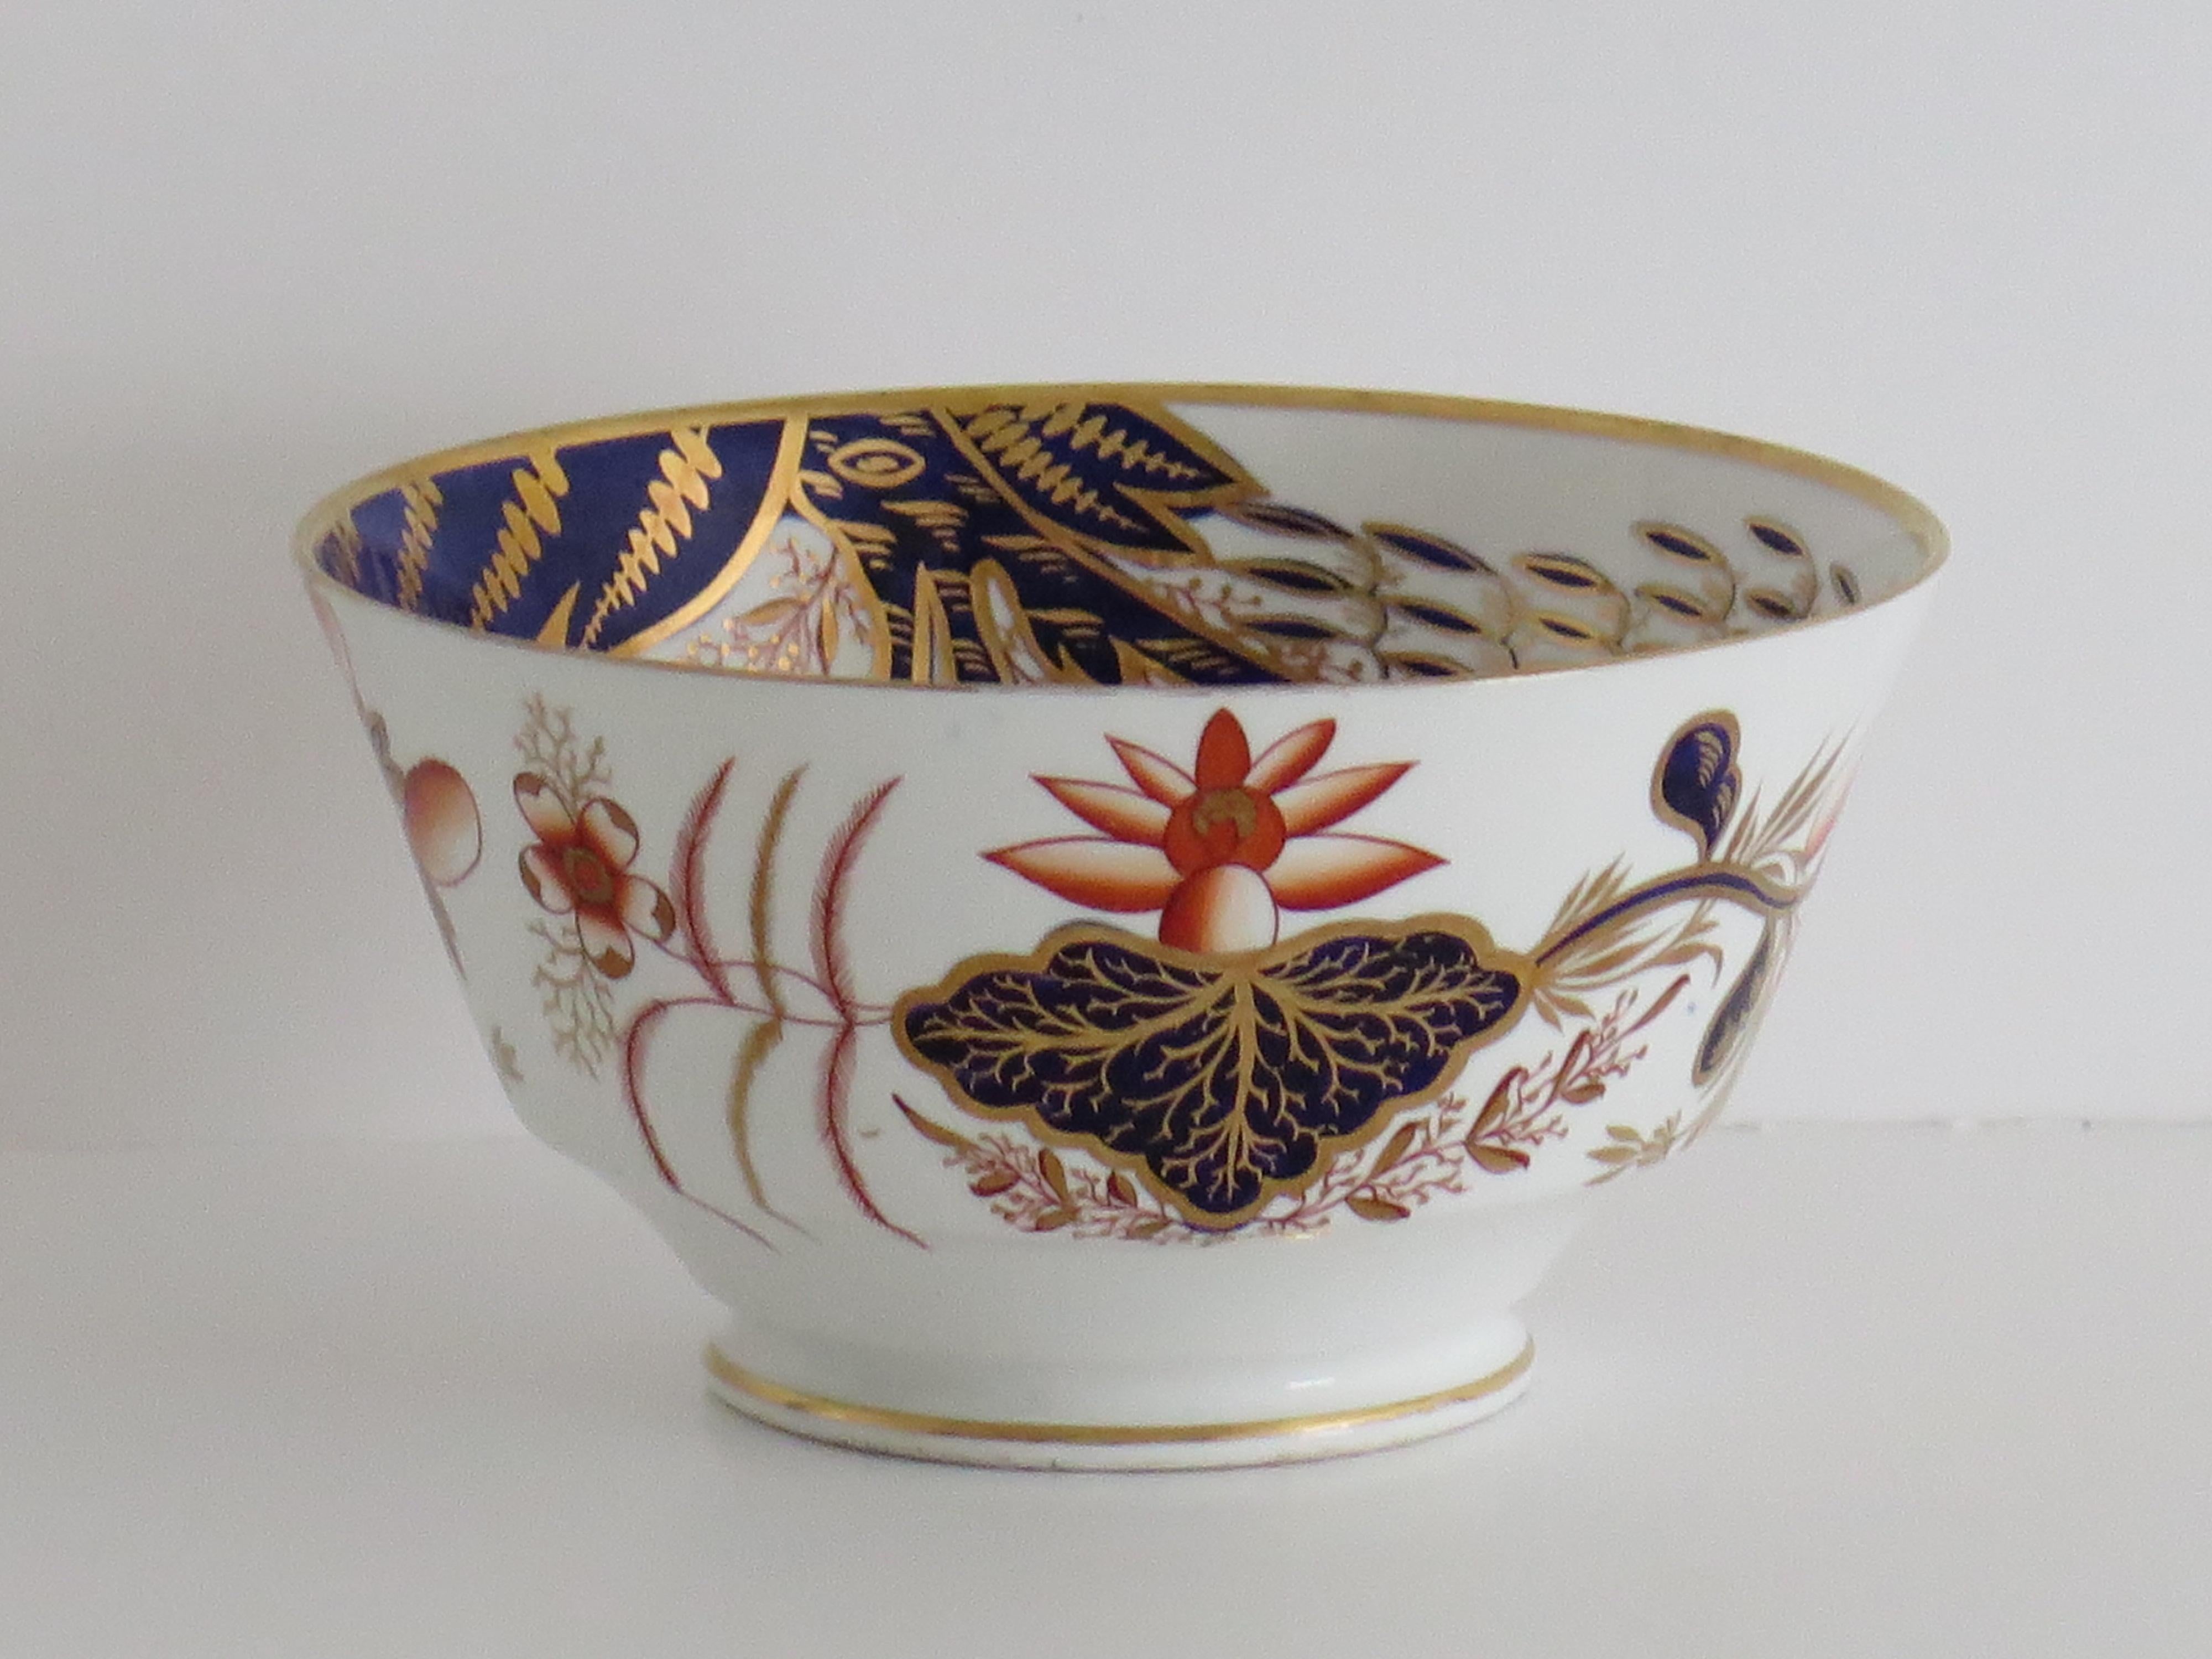 George III Early 19th Century Spode Porcelain Slop Bowl in gilded Pattern 2214, Ca 1810 For Sale